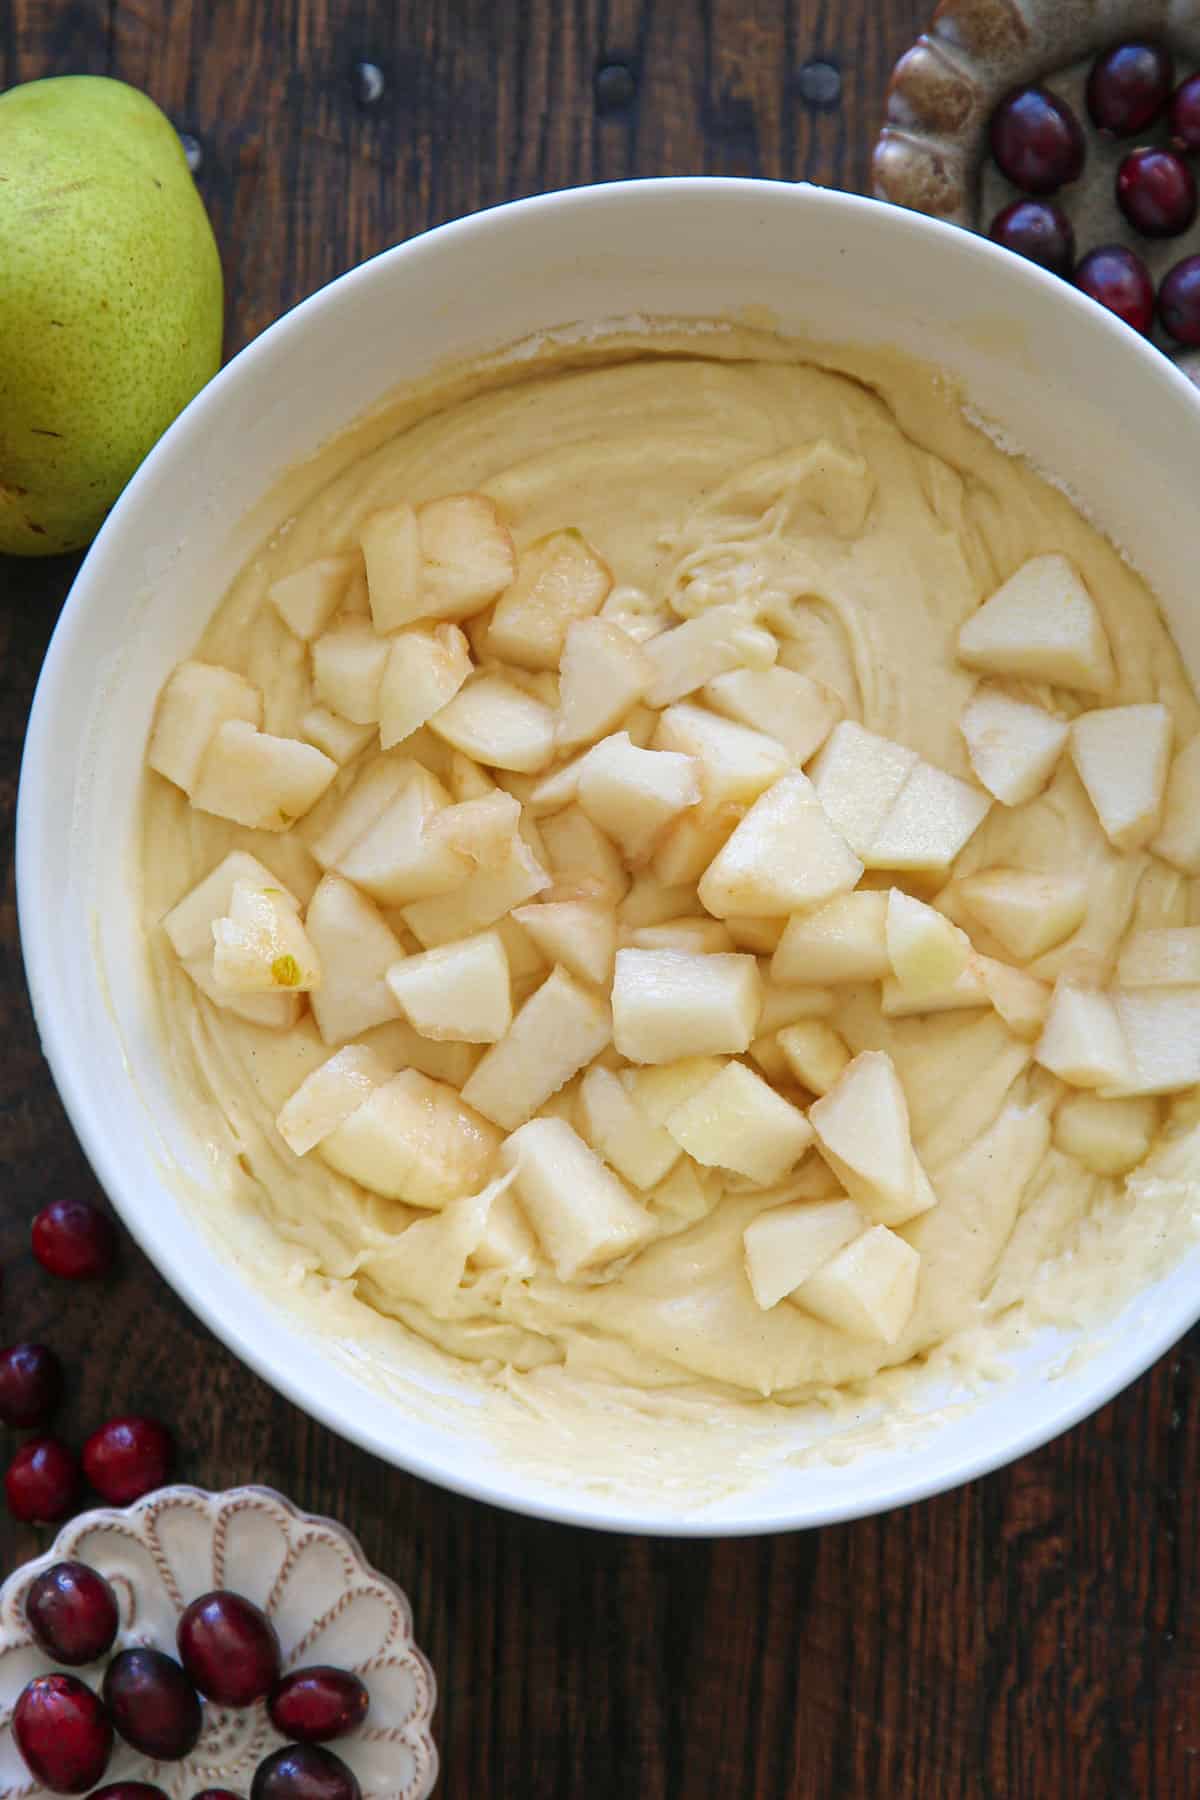 chopped peeled and cored pears in a cake batter in a mixing bowl.